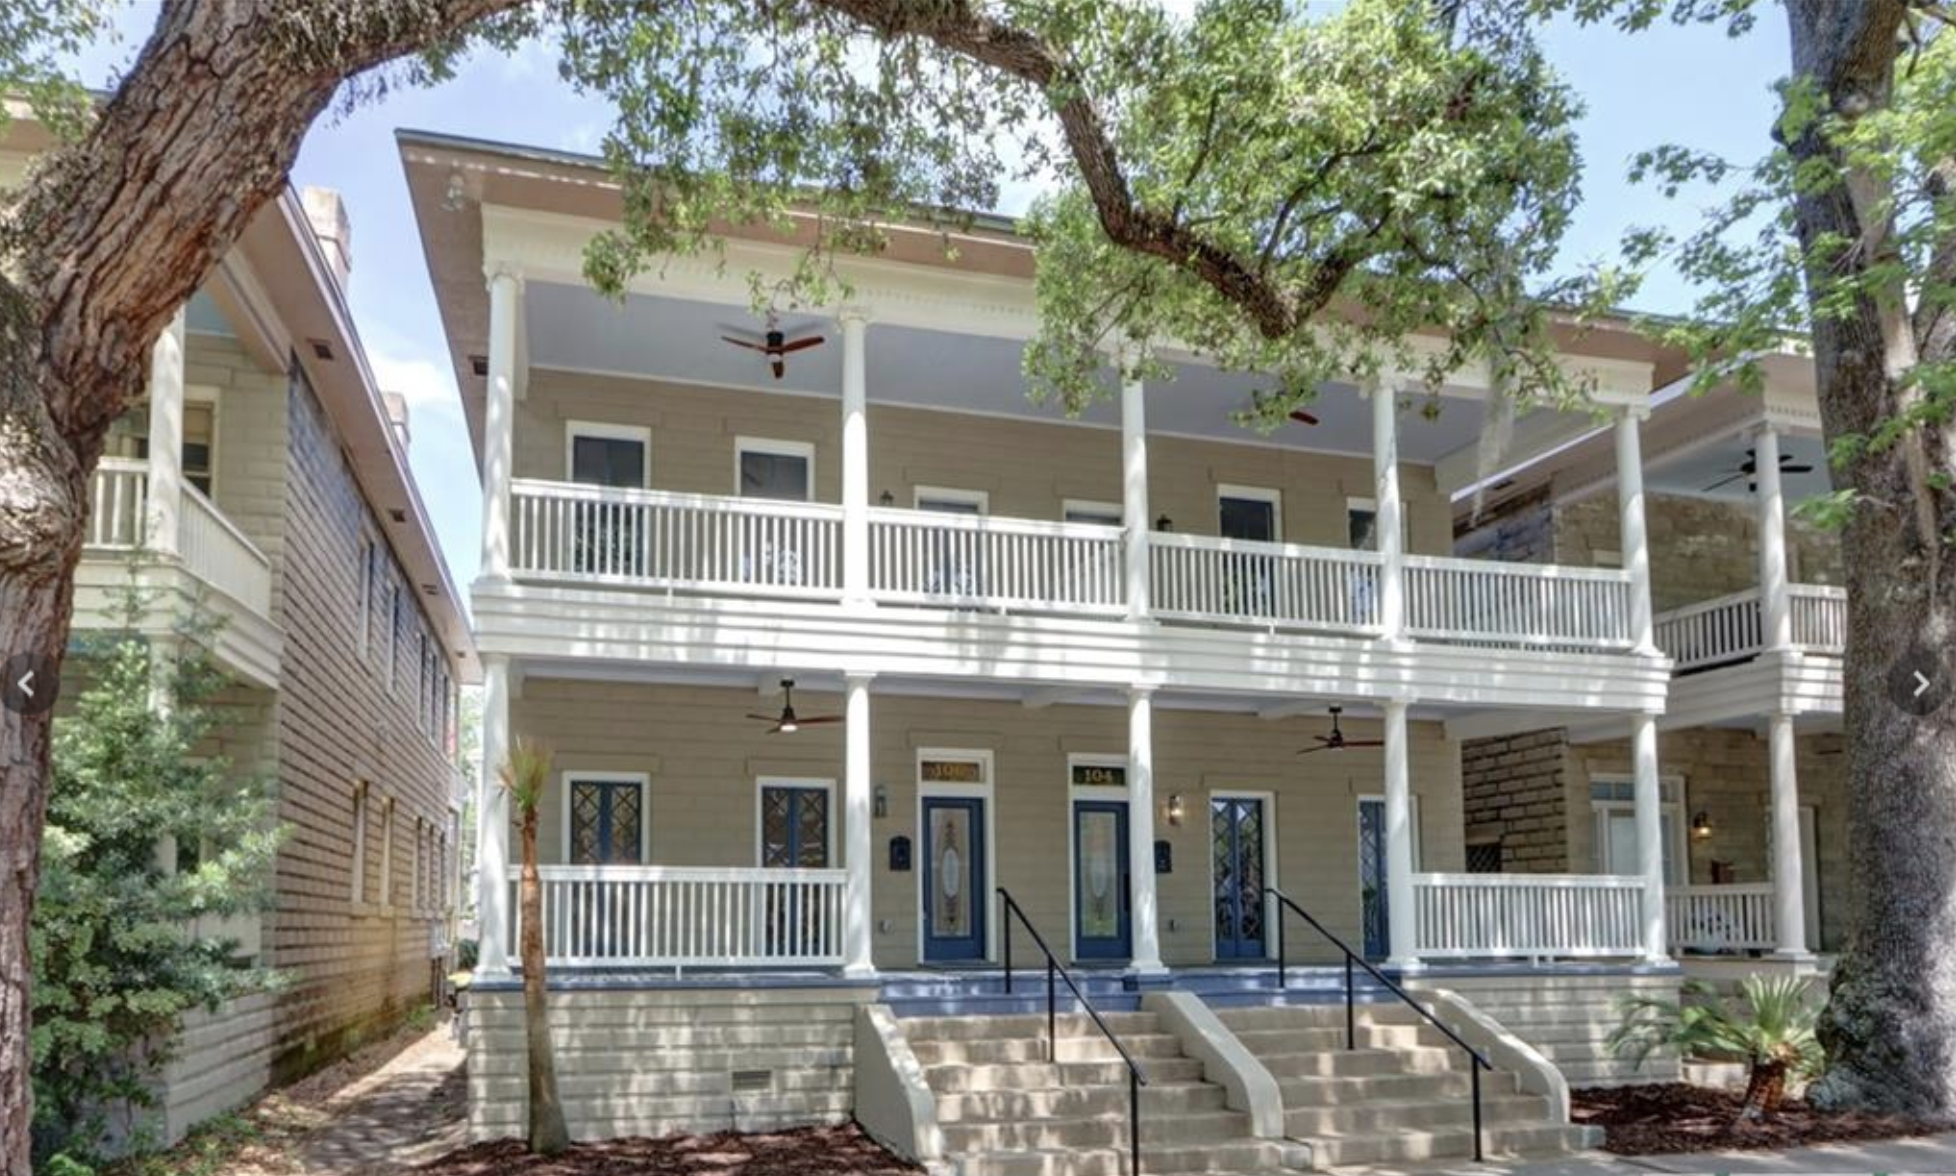 Featured image for “104 W 38th St. | Savannah, GA 31401”